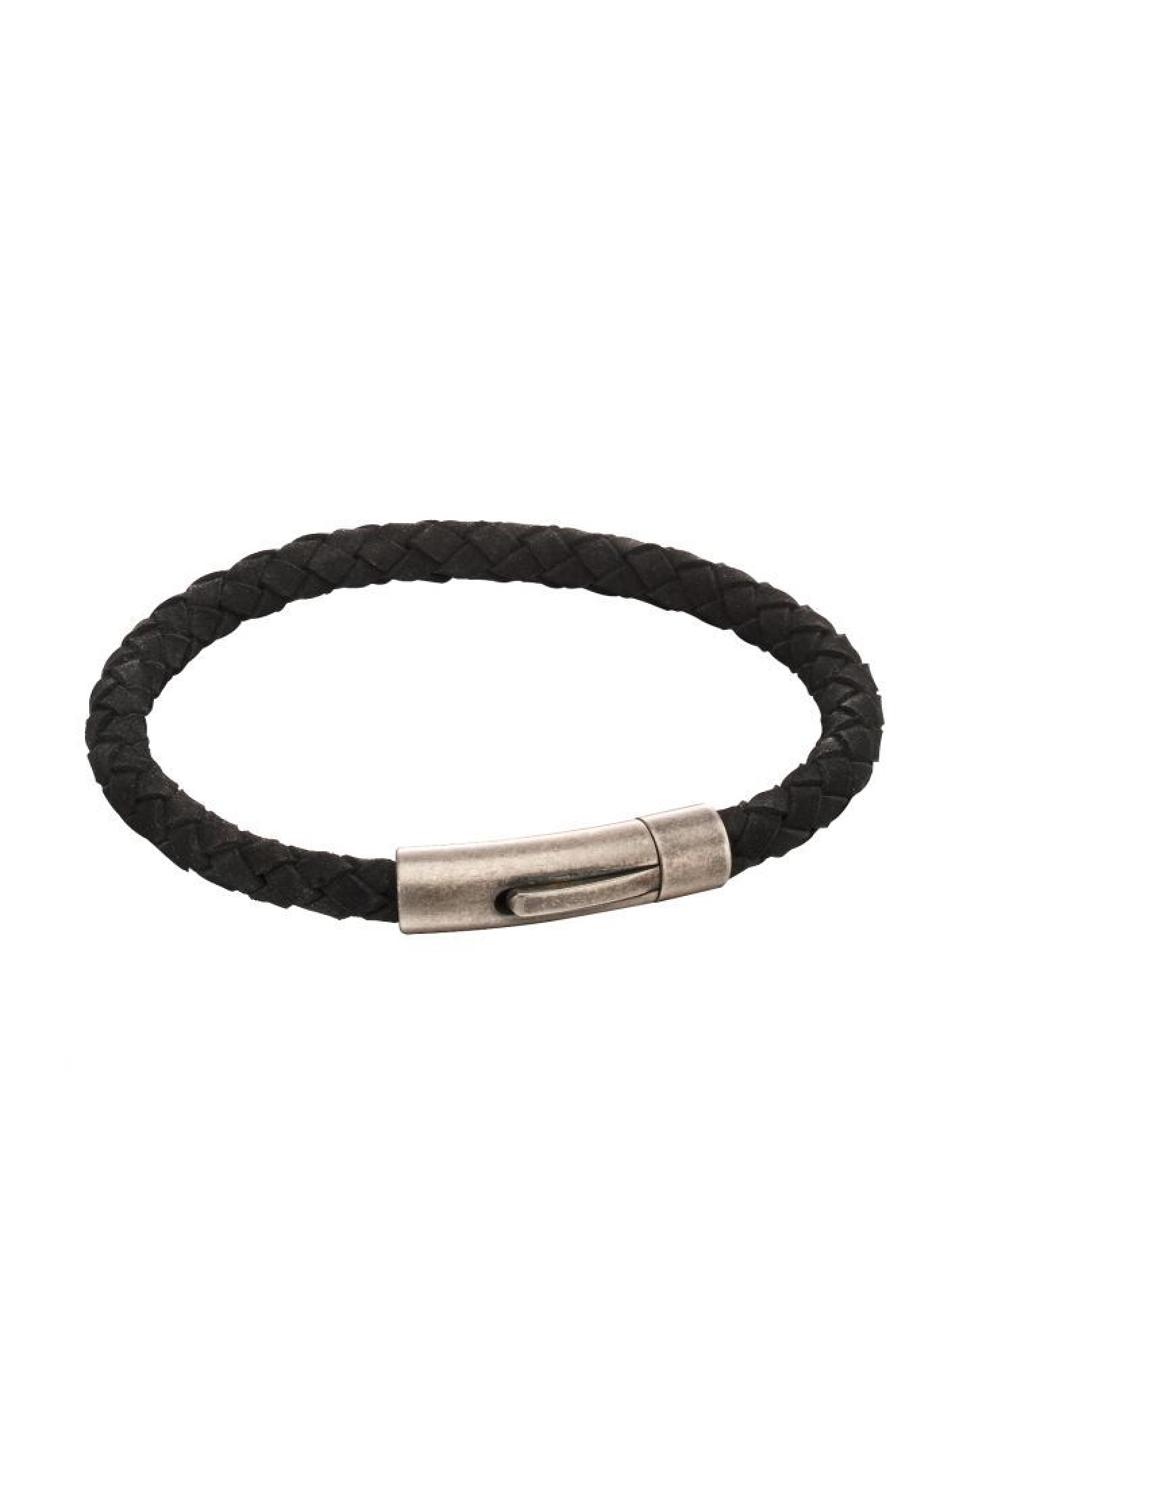 Fred Bennett - Stainless steel black suede silver clasp bracelet